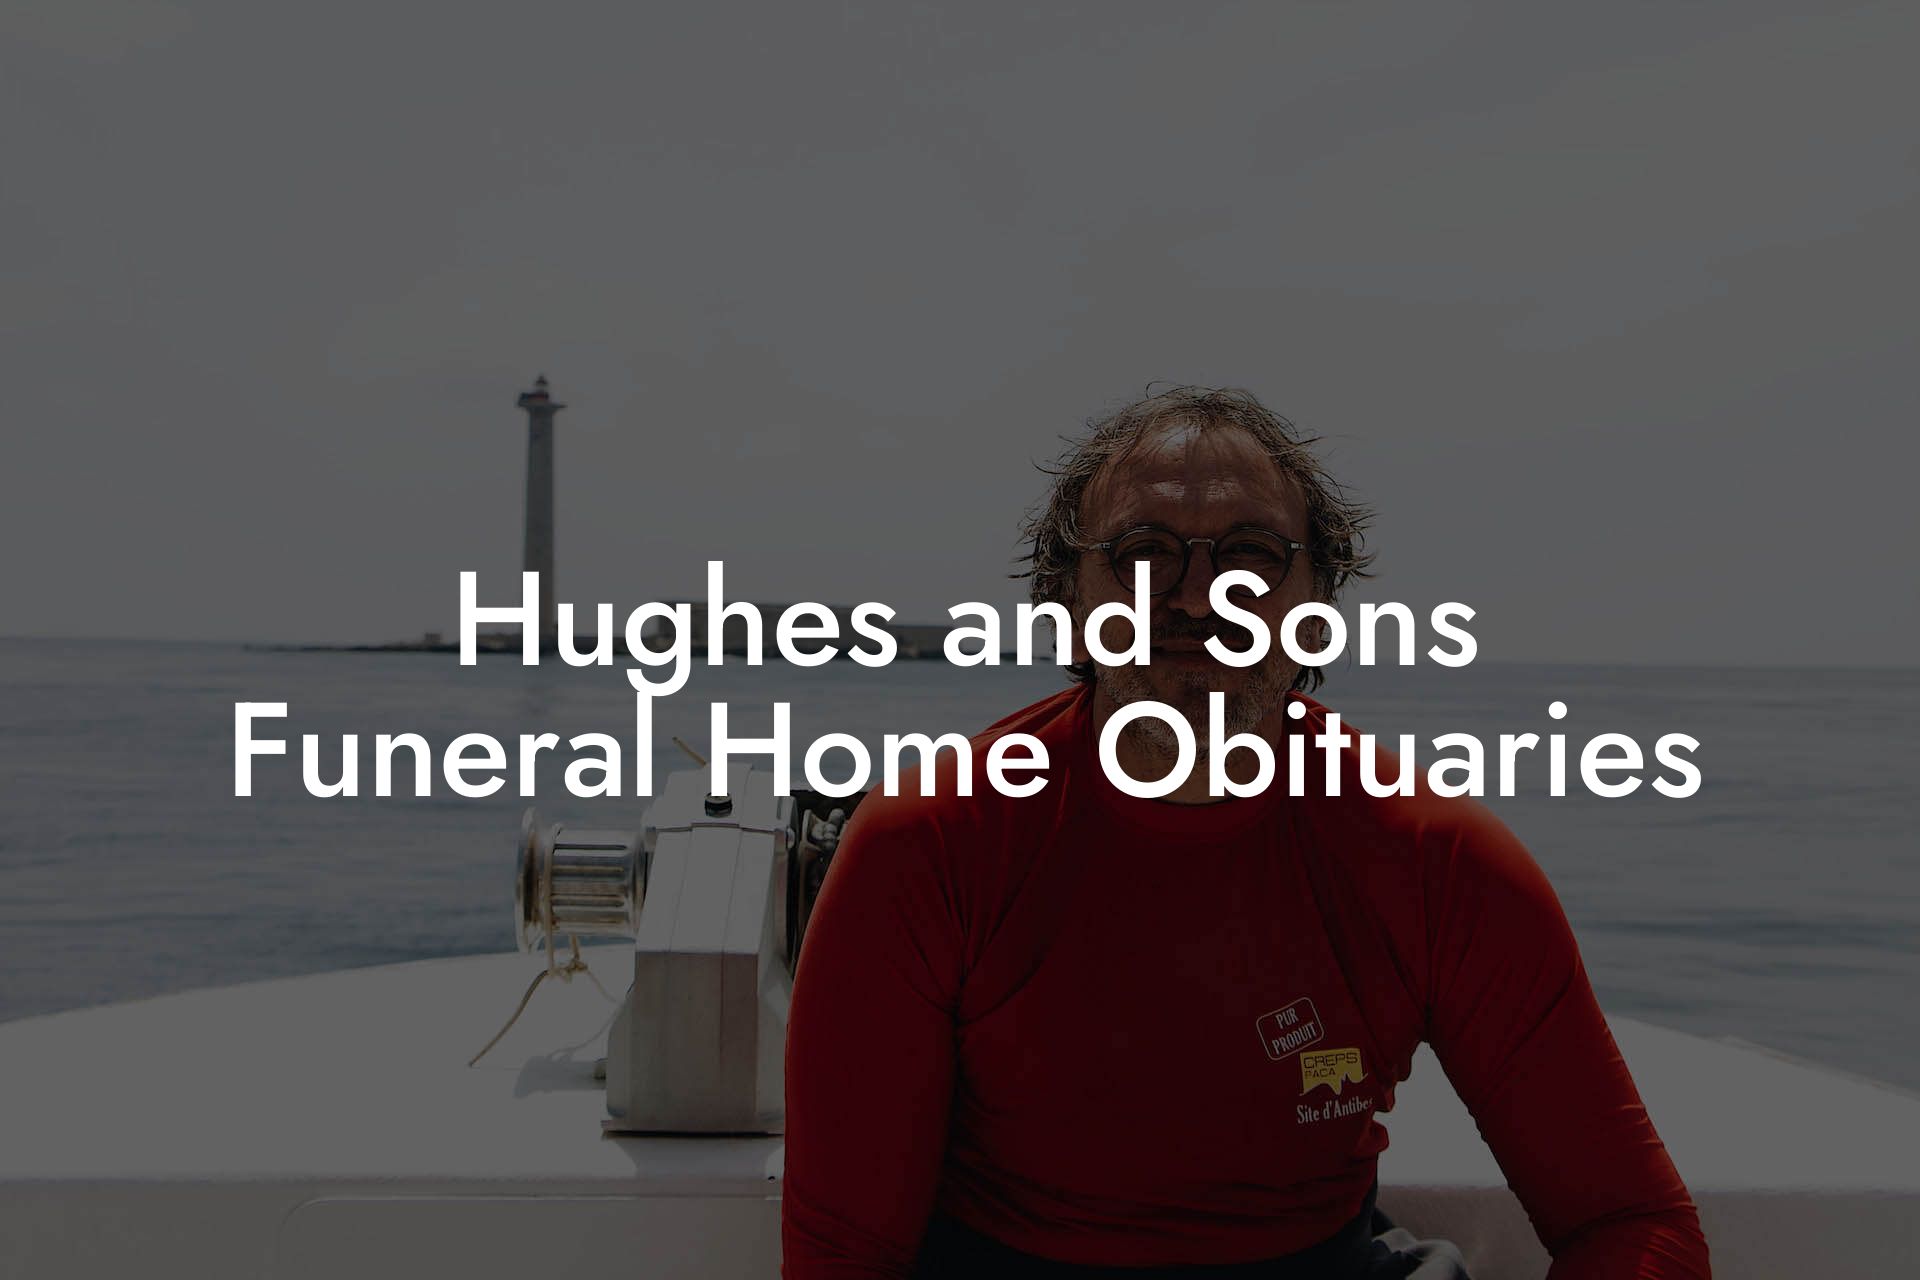 Hughes and Sons Funeral Home Obituaries